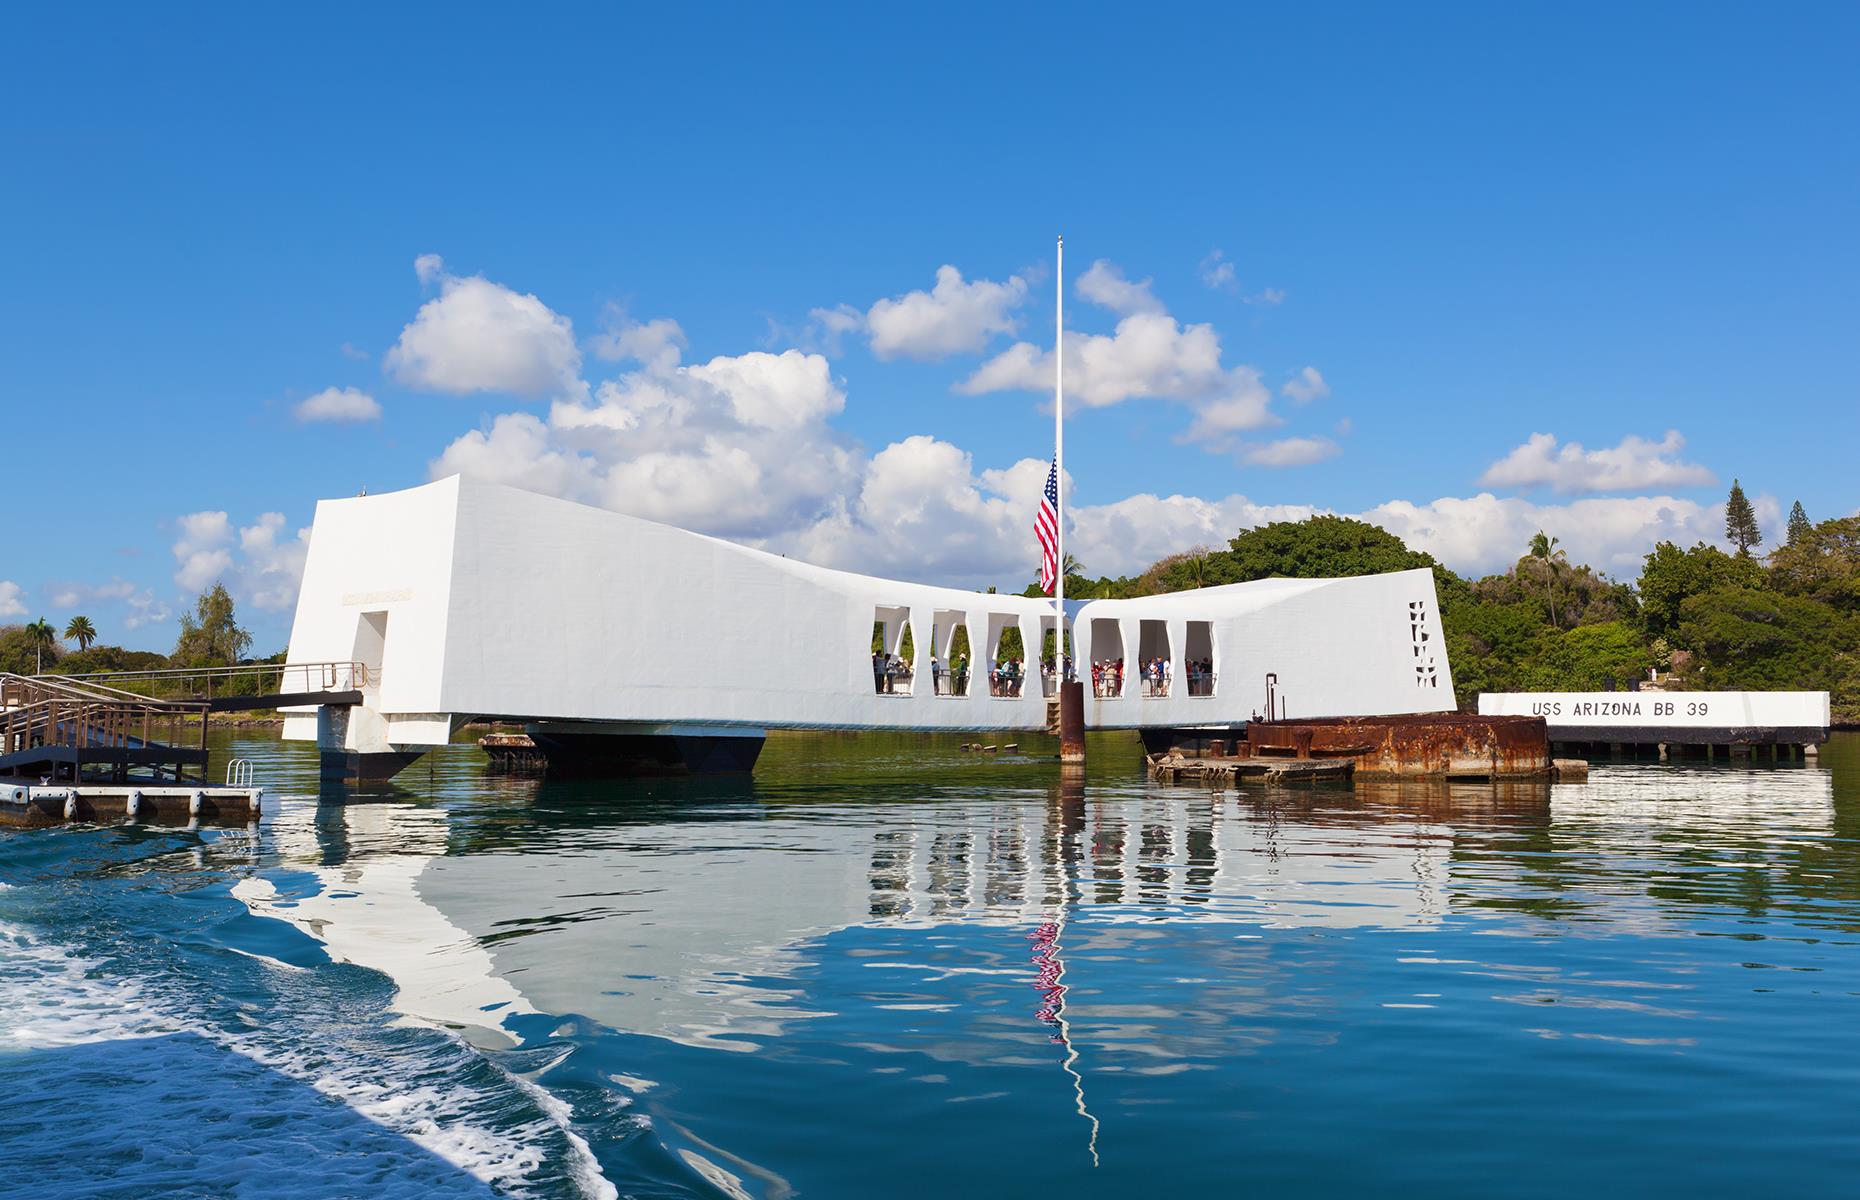 <p>Pearl Harbor<span>, a US naval base on the Hawaiian isle of Oahu, was the site of a surprise attack by the Japanese in 1941, during the Second World War, and museums and monuments here memorialize the tragic event. A key sight is the USS Arizona Memorial, a tribute to one of the ships that was sunk during the strike. The head-turning white structure is built above the vessel's wreckage.</span></p>